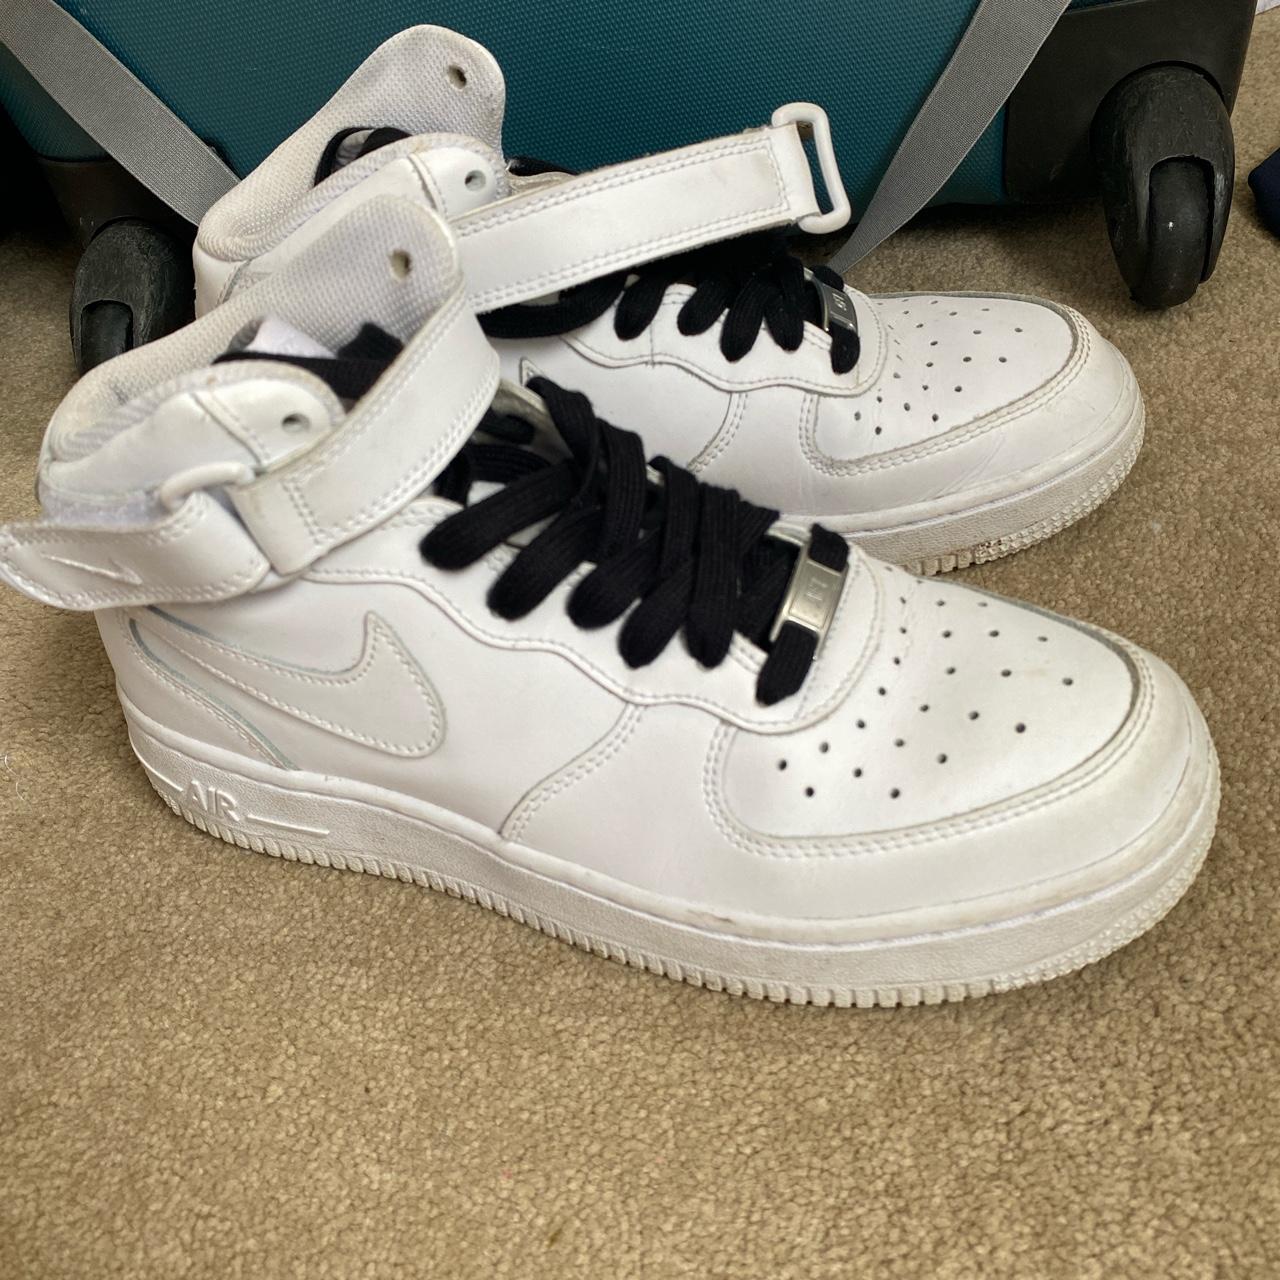 Nike airforce 1 high tops. In great condition hardly... - Depop